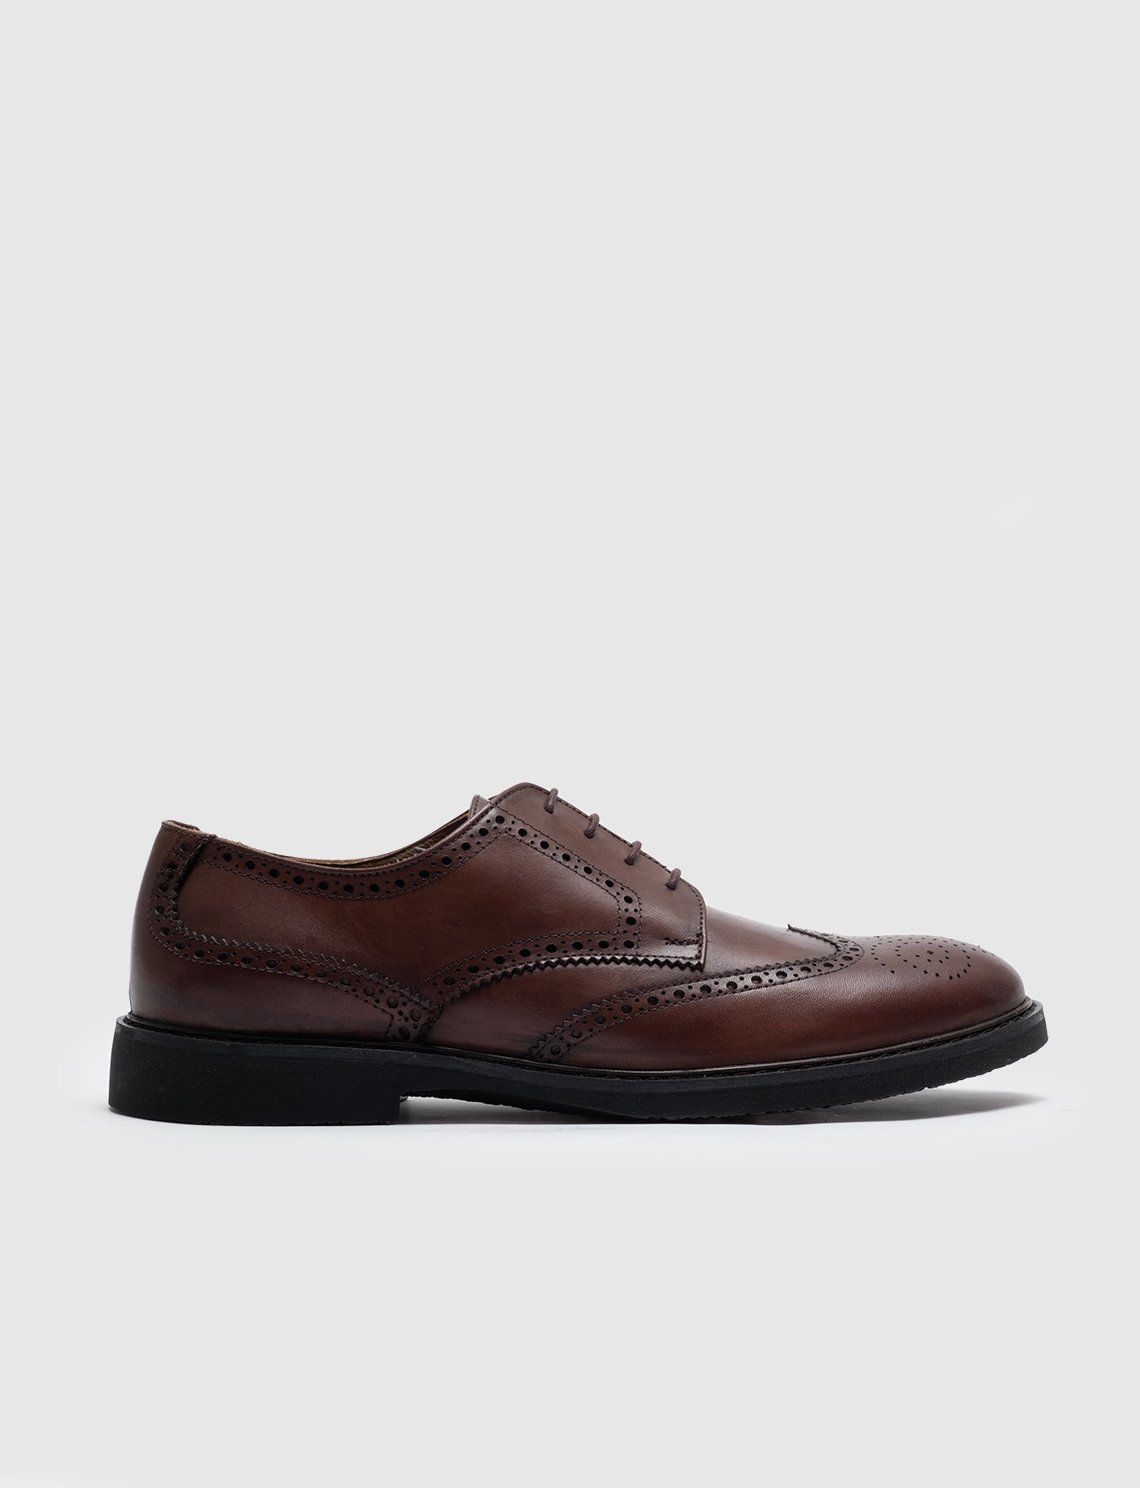 Men Genuine Leather Wingtip Oxford Shoes